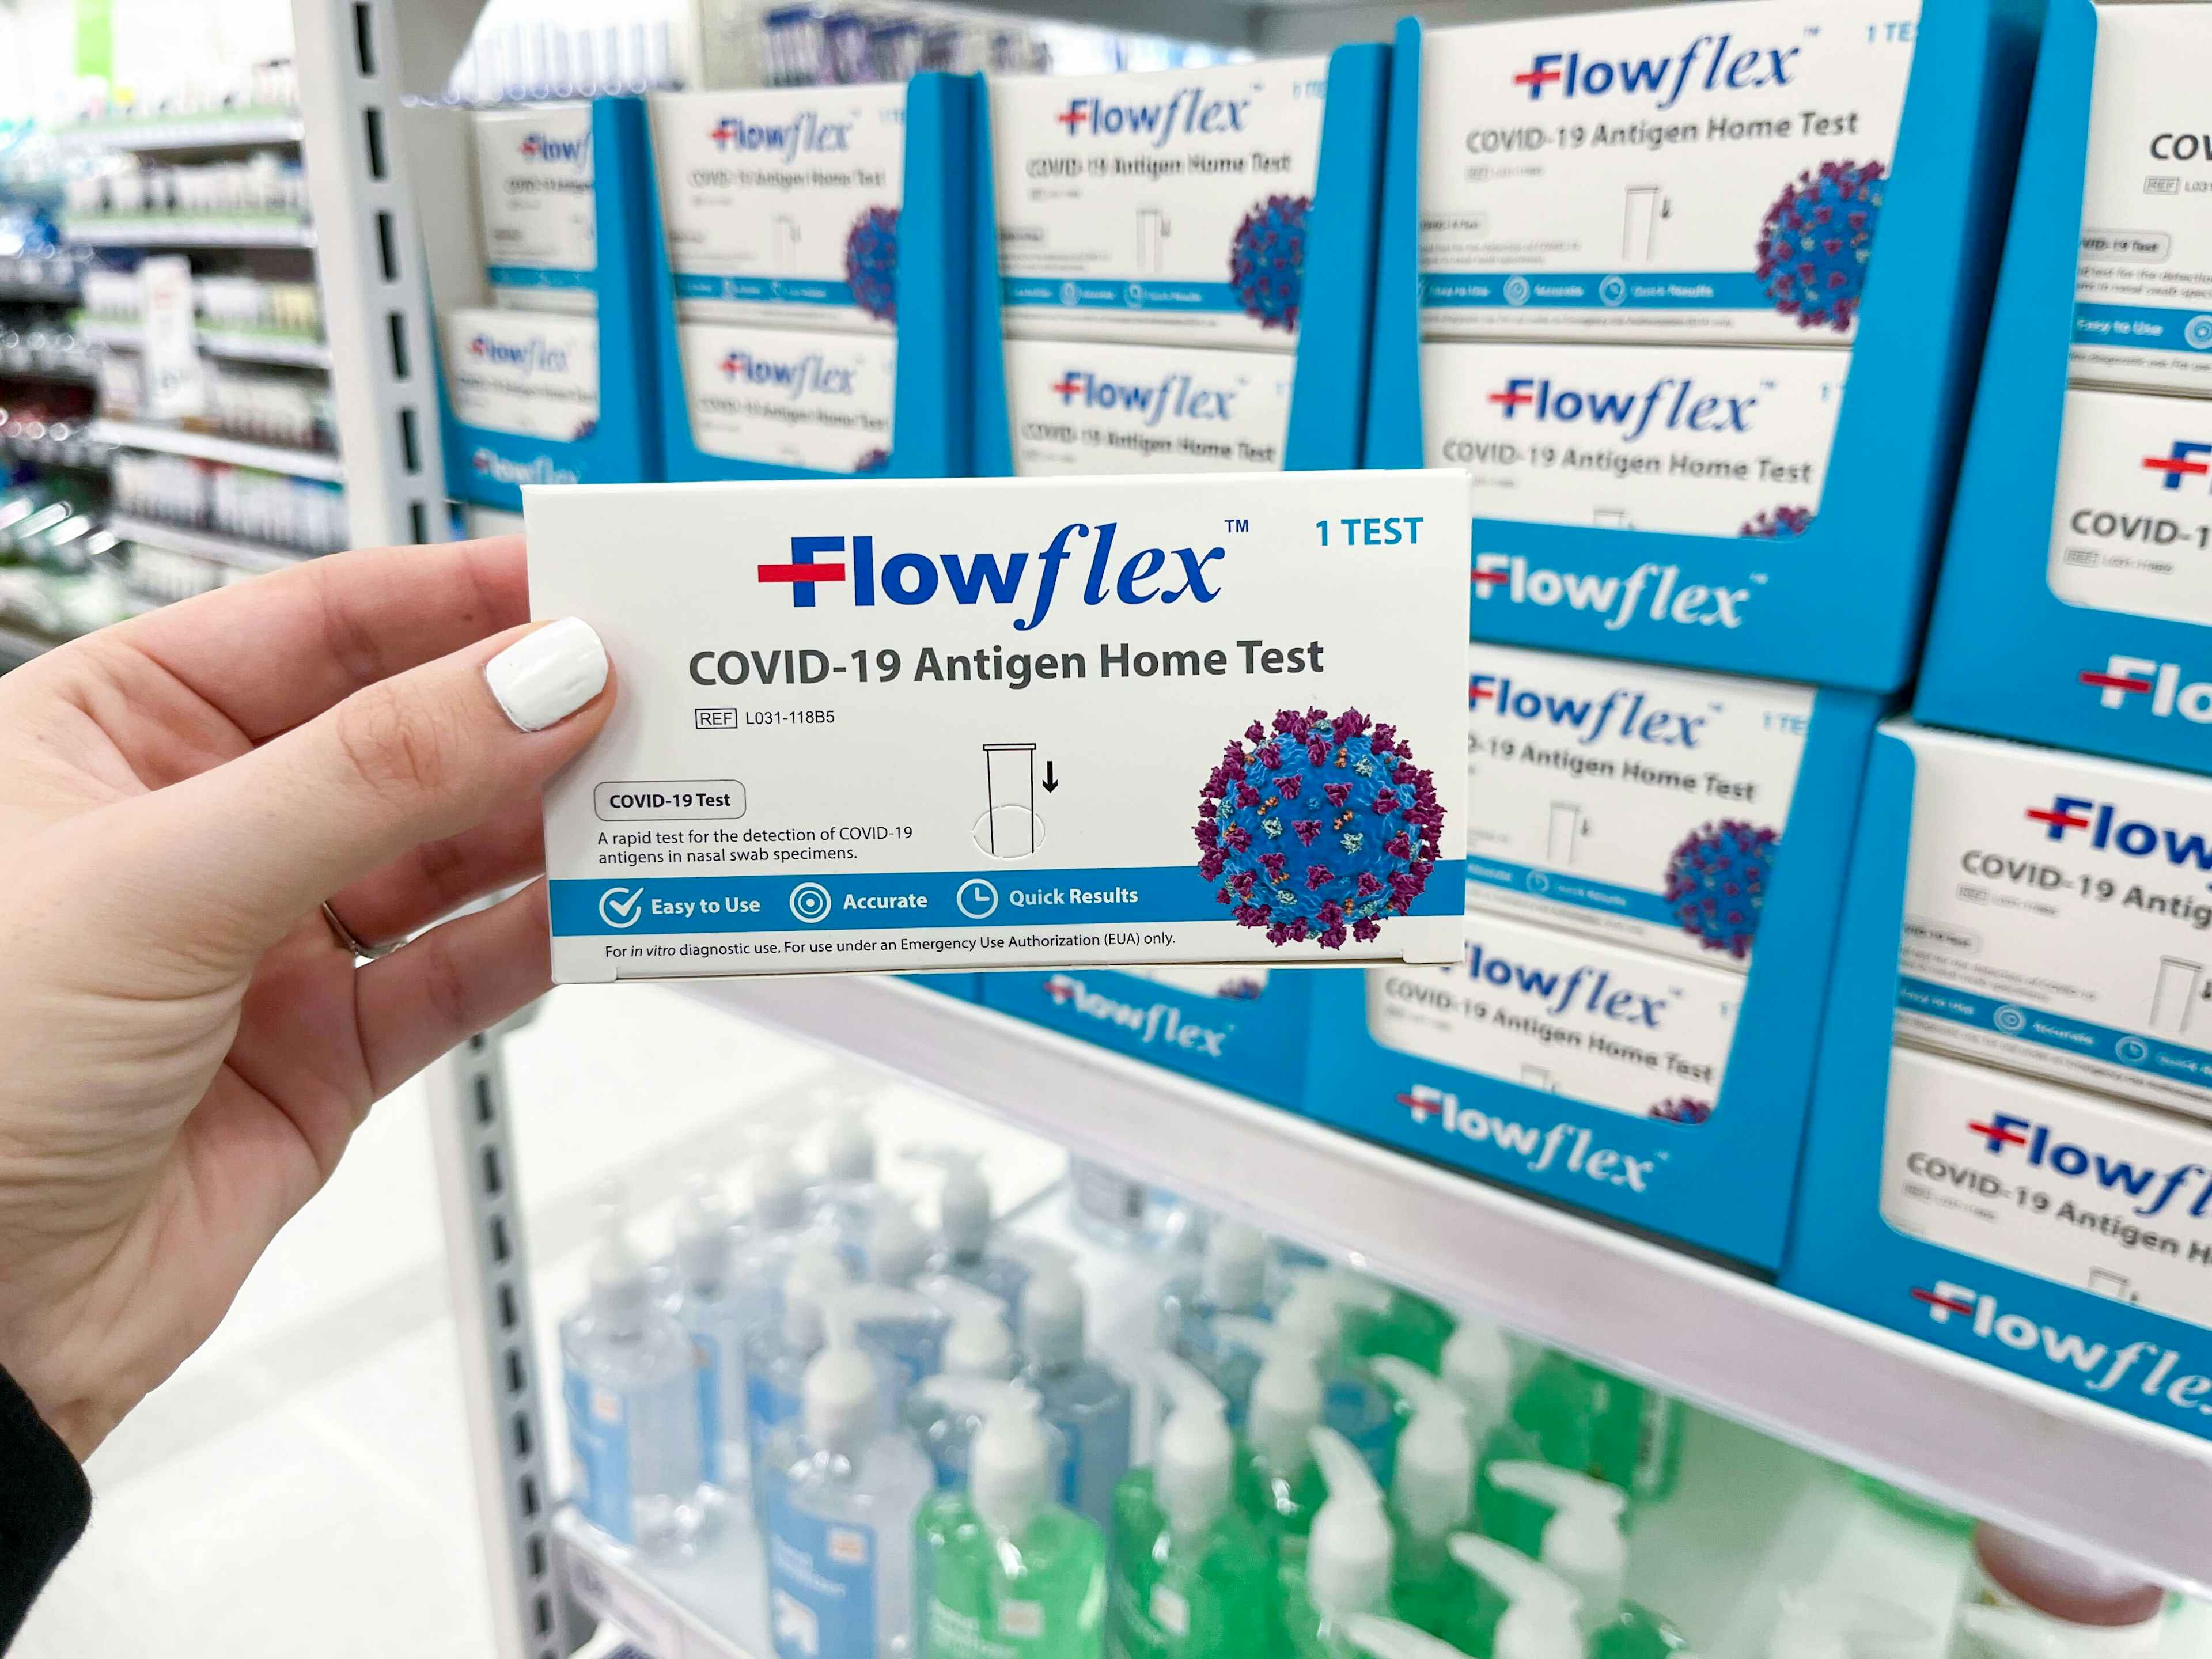 A person's hand holding up a box of FlowFlex Covid-19 Tests in front of in store display.